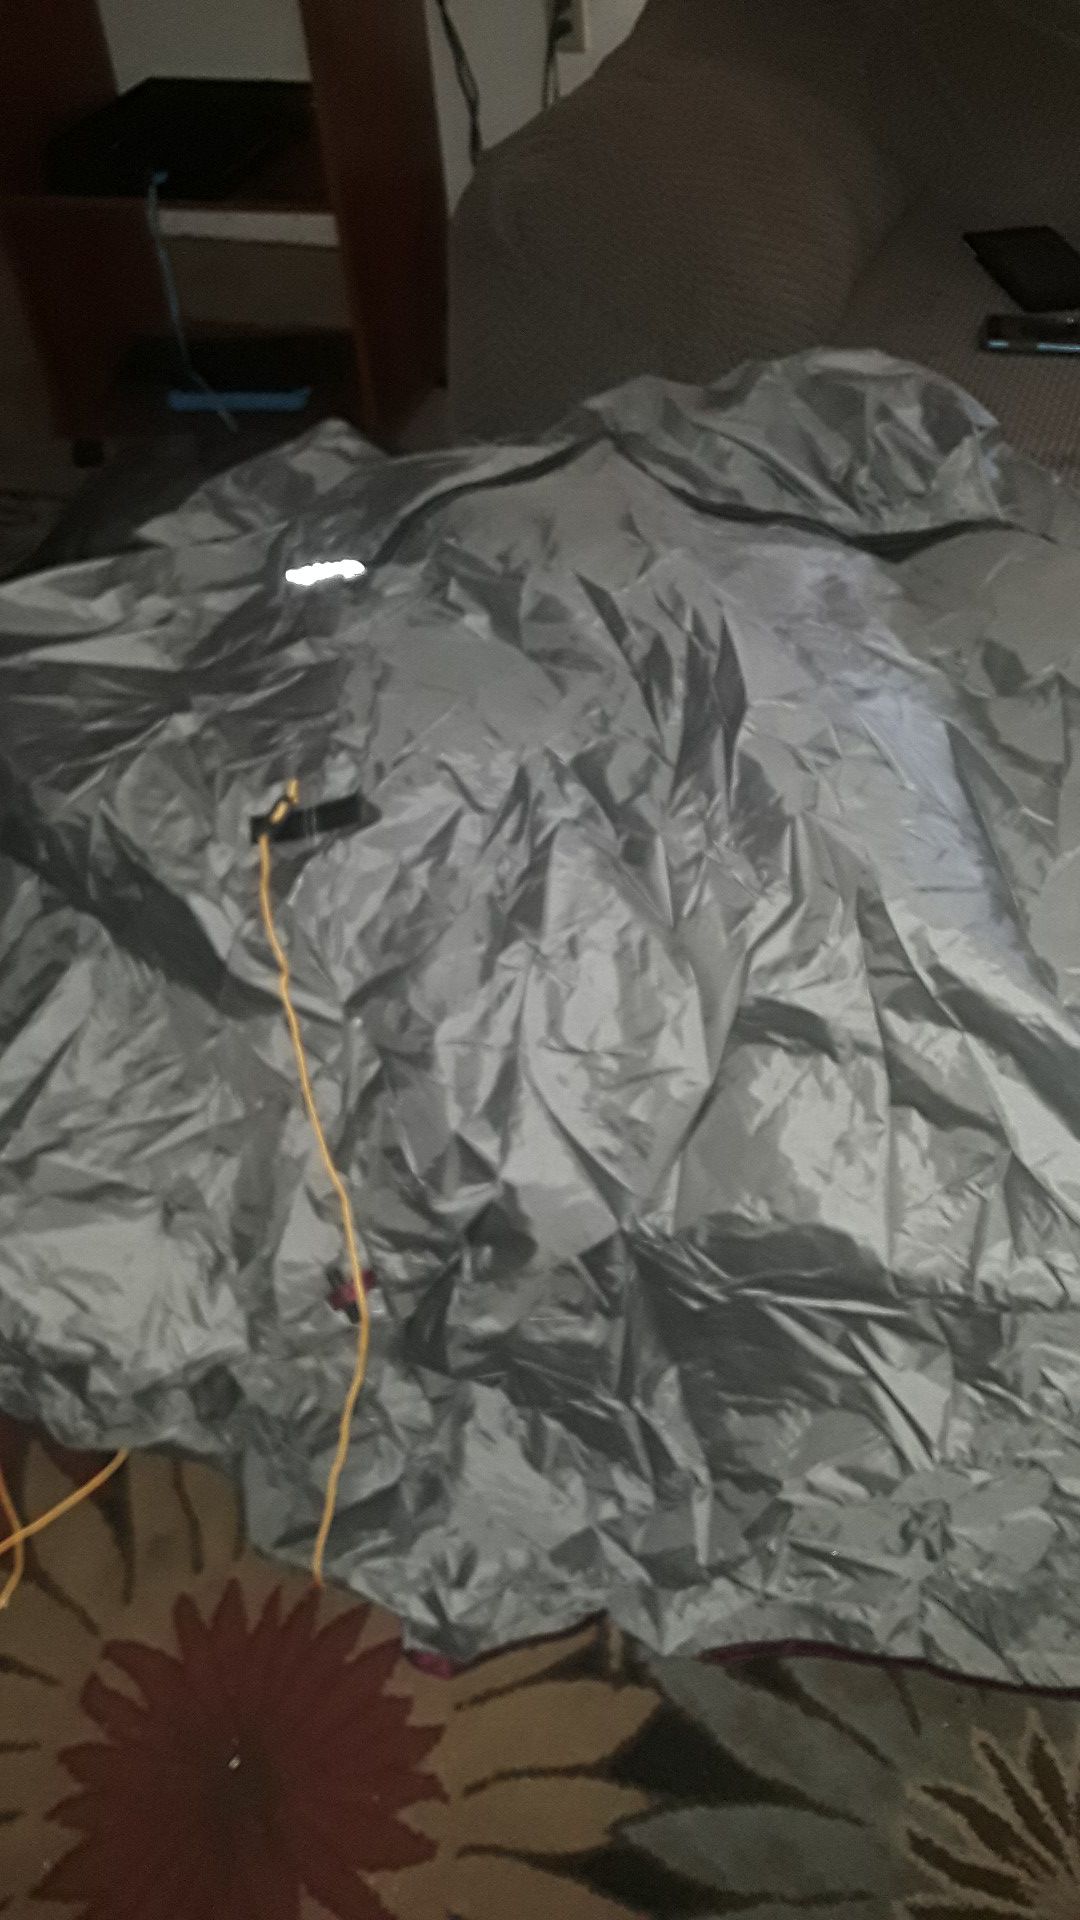 Tarps for camping